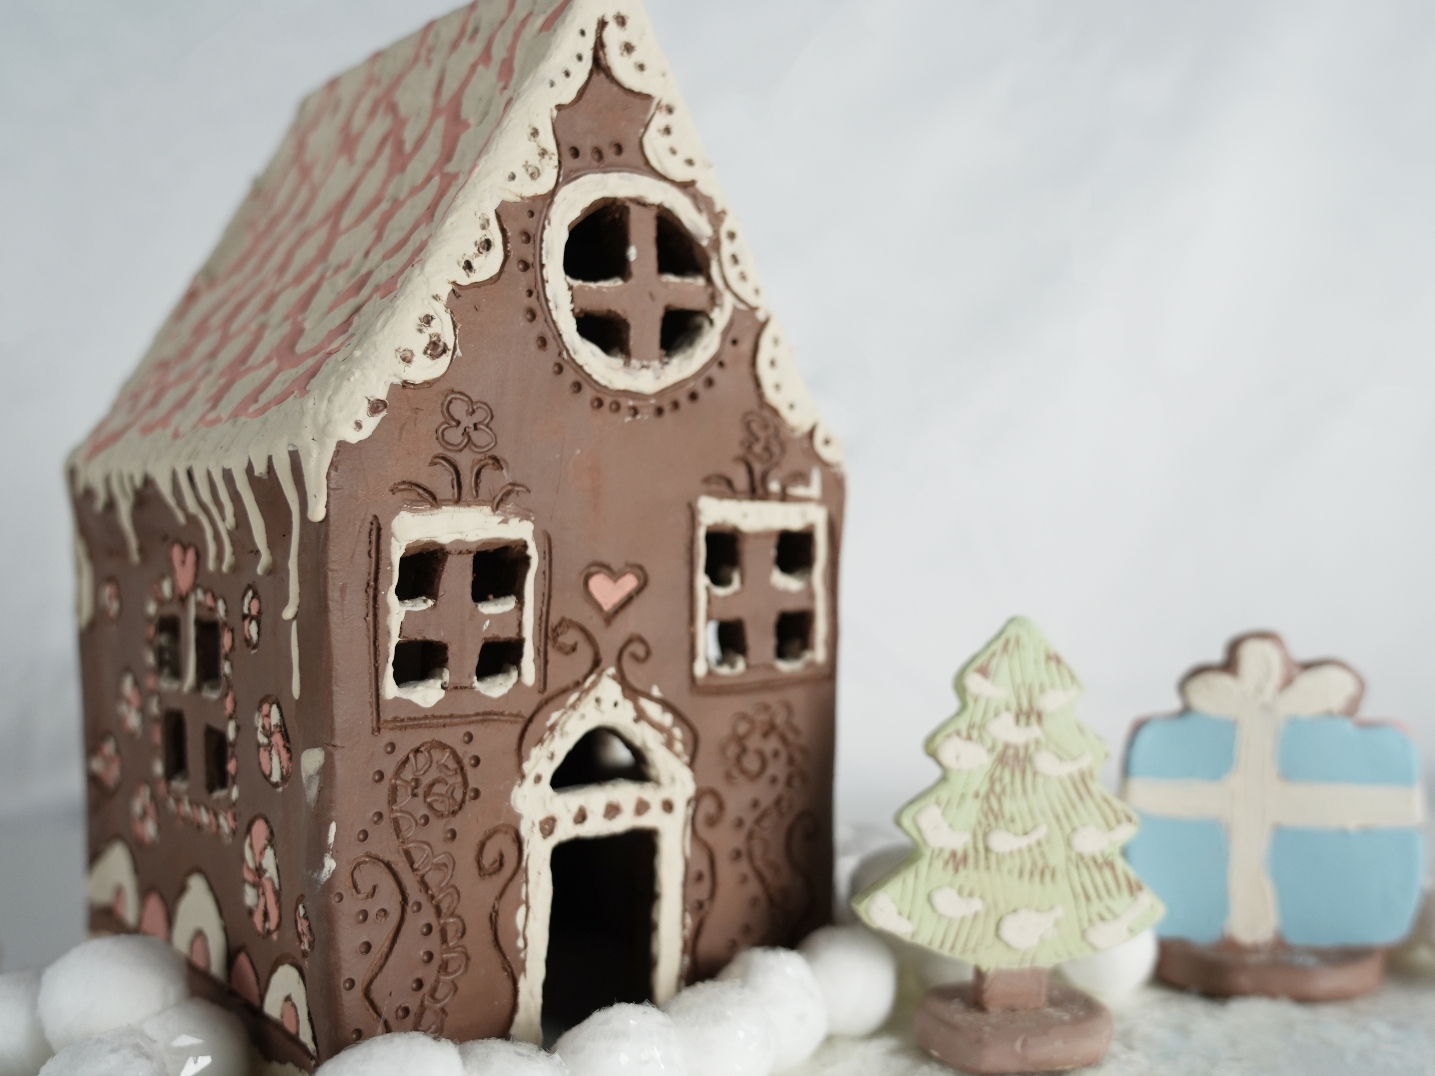 Photo of a handmade clay gingerbread house.